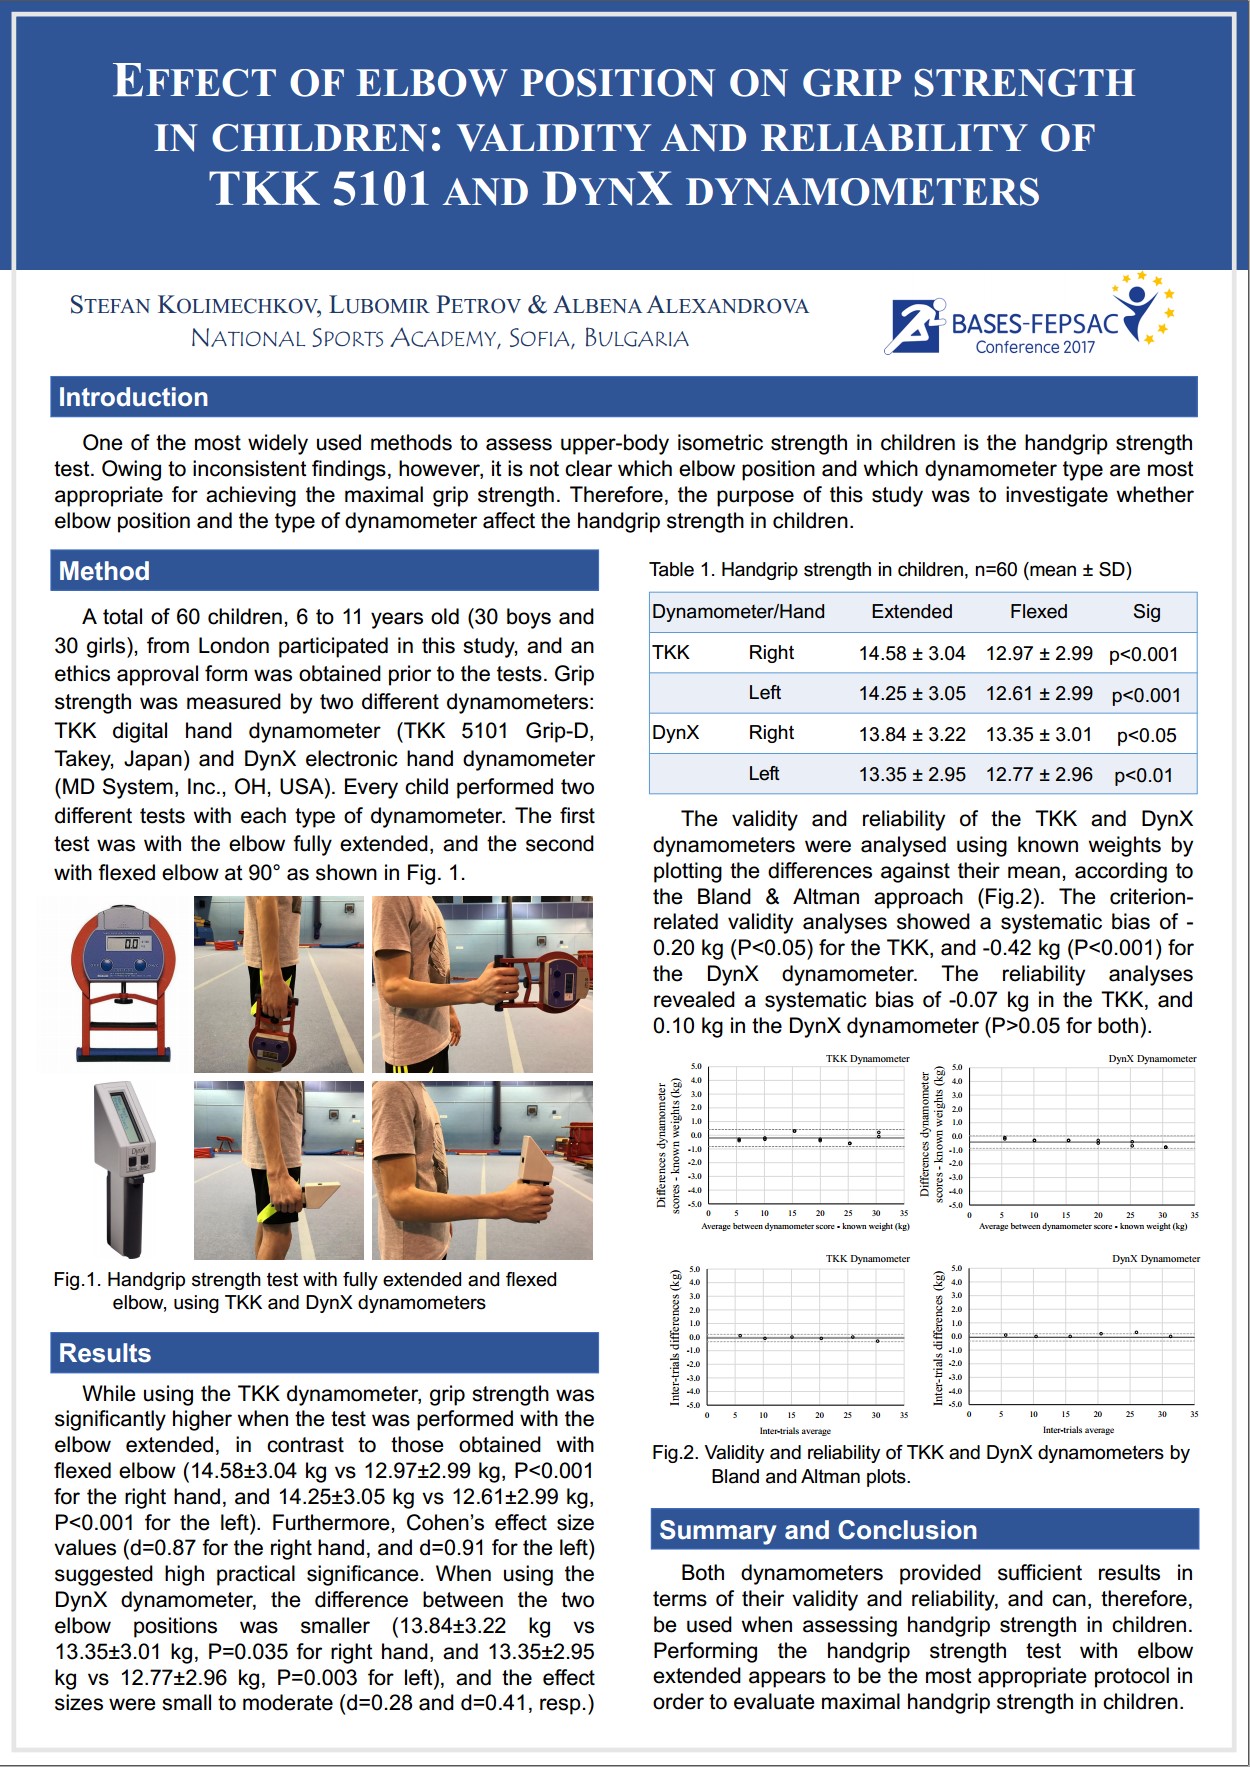 Effect of elbow position on grip strength at the BASES-FEPSAC Conference 2017